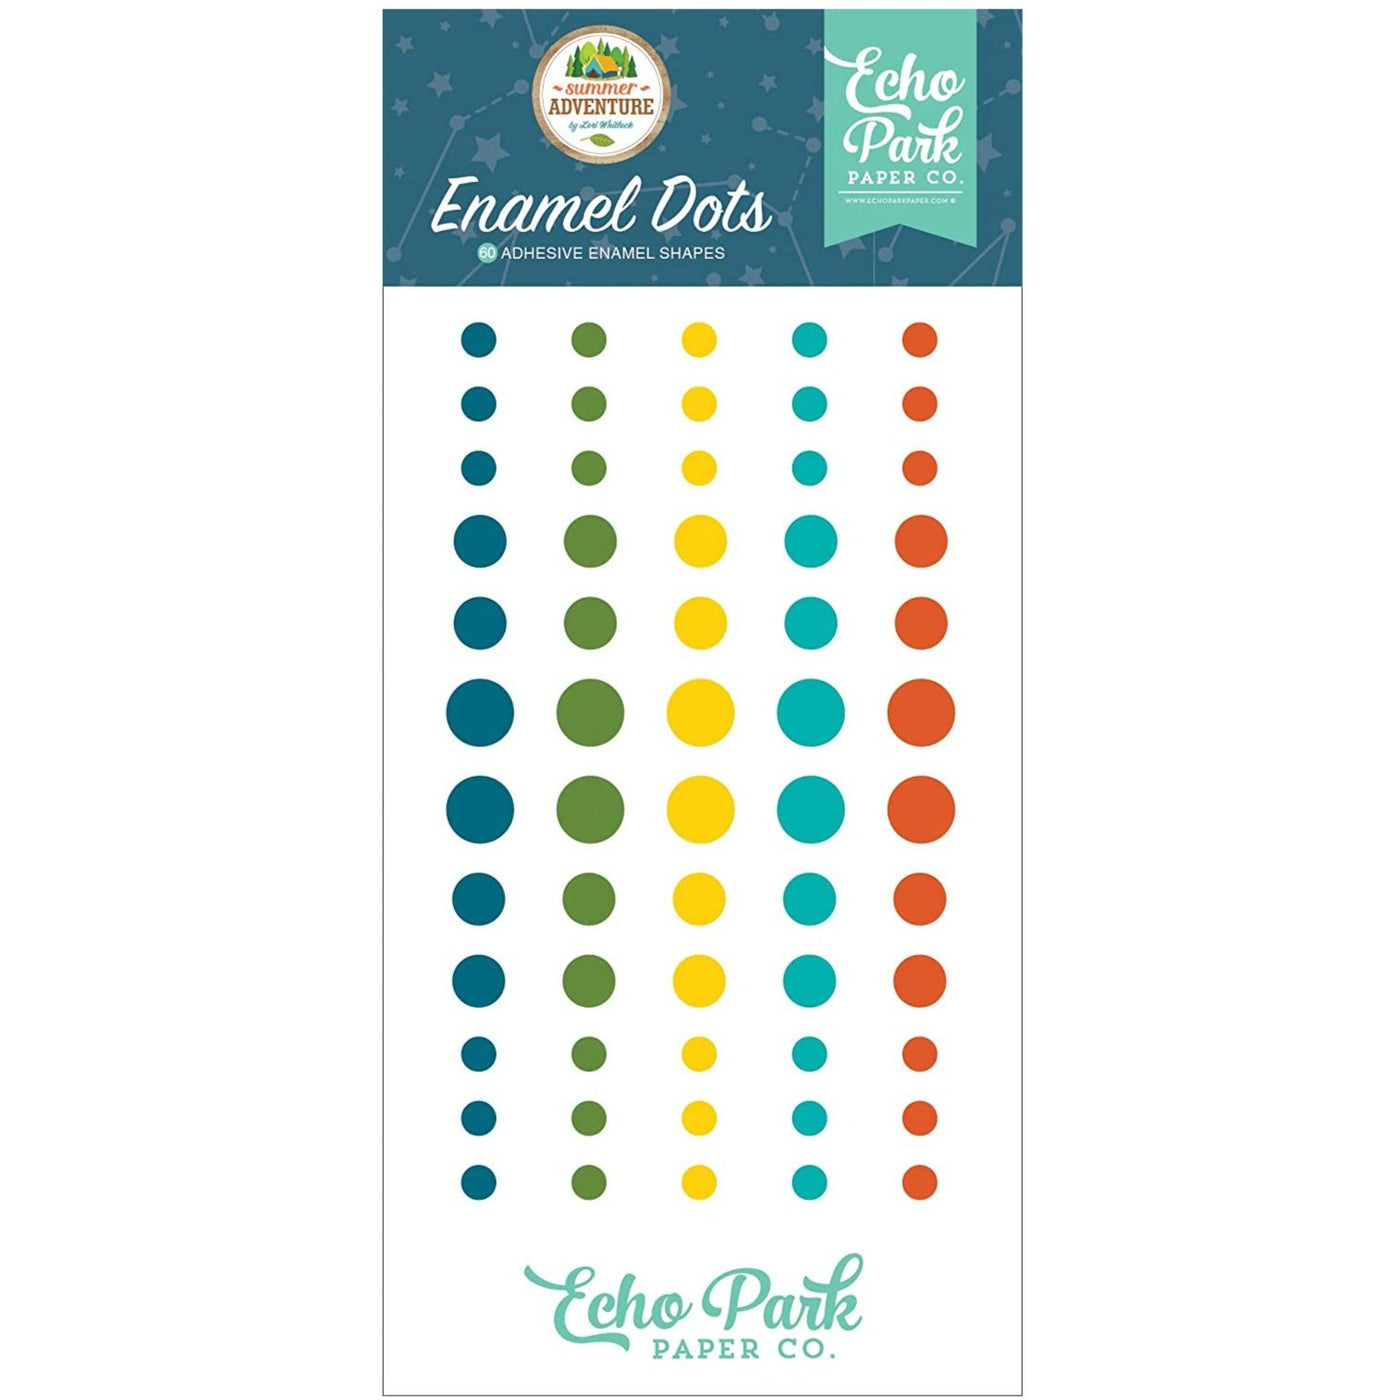 60 enamel dots in five bright summertime colors from Echo Park Paper Co.